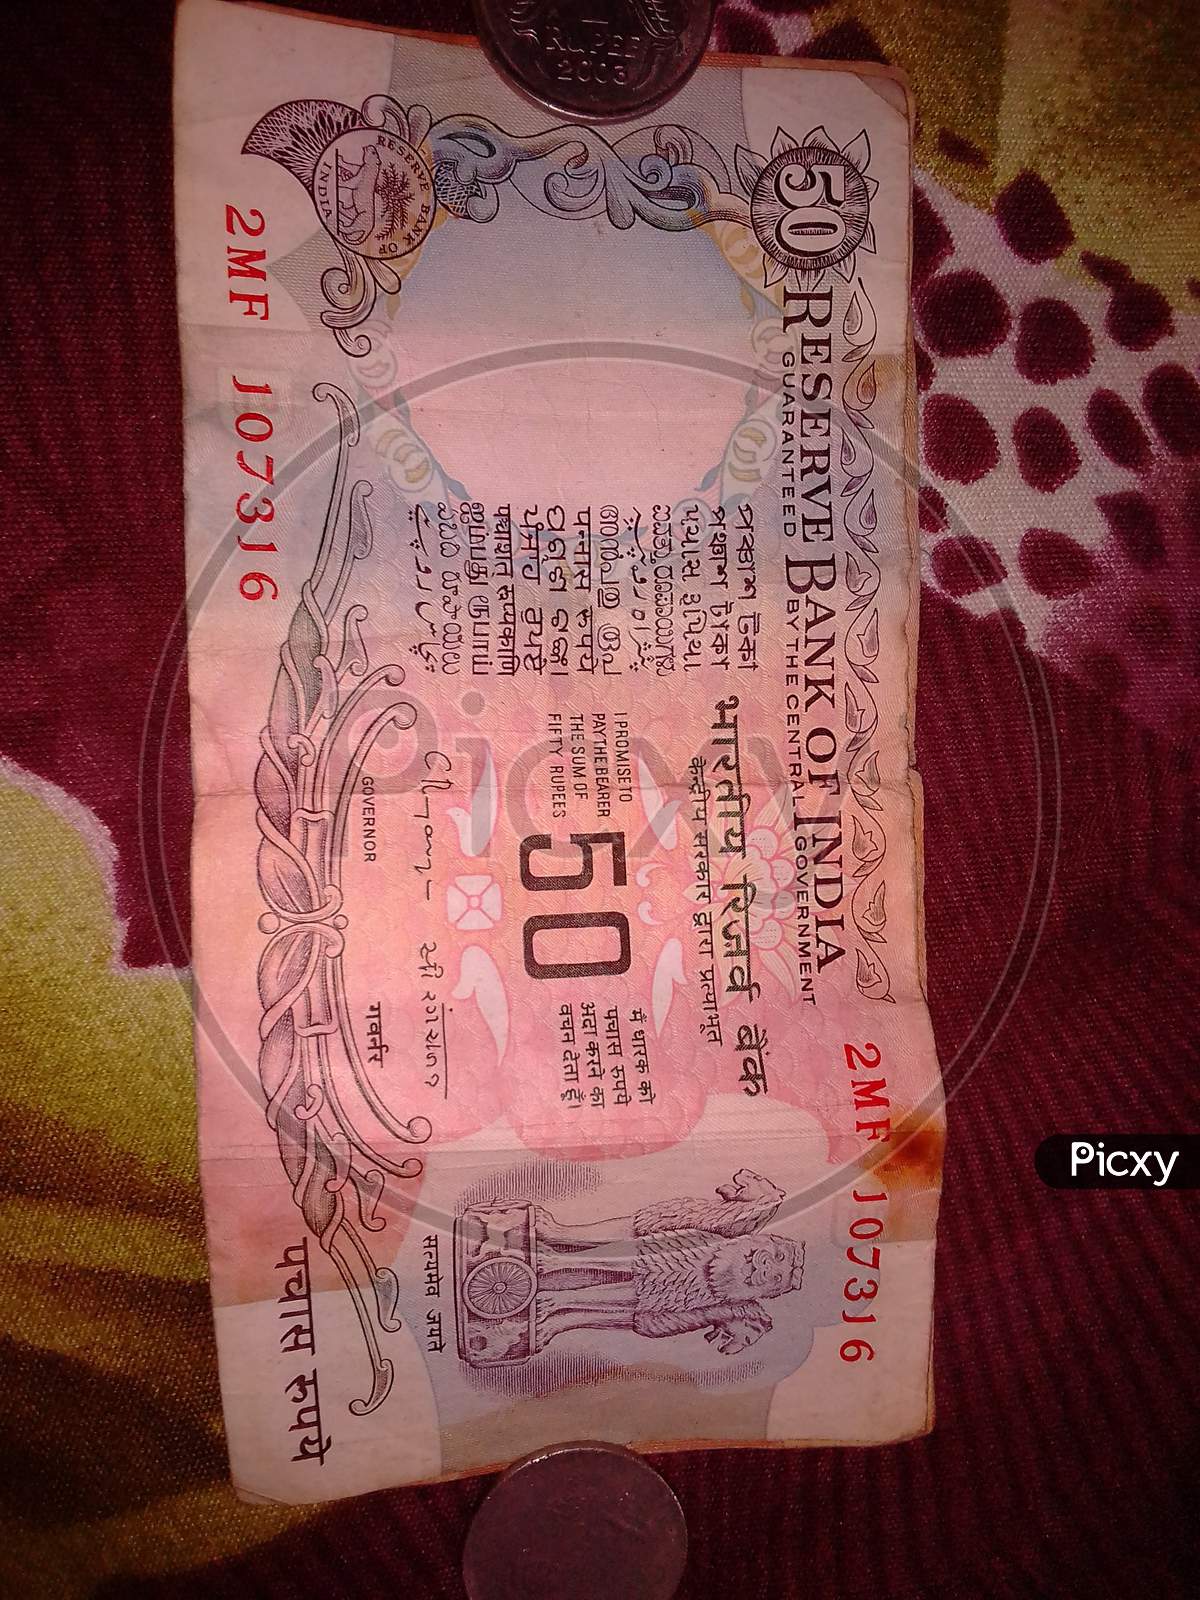 Old indian currency 50rupees